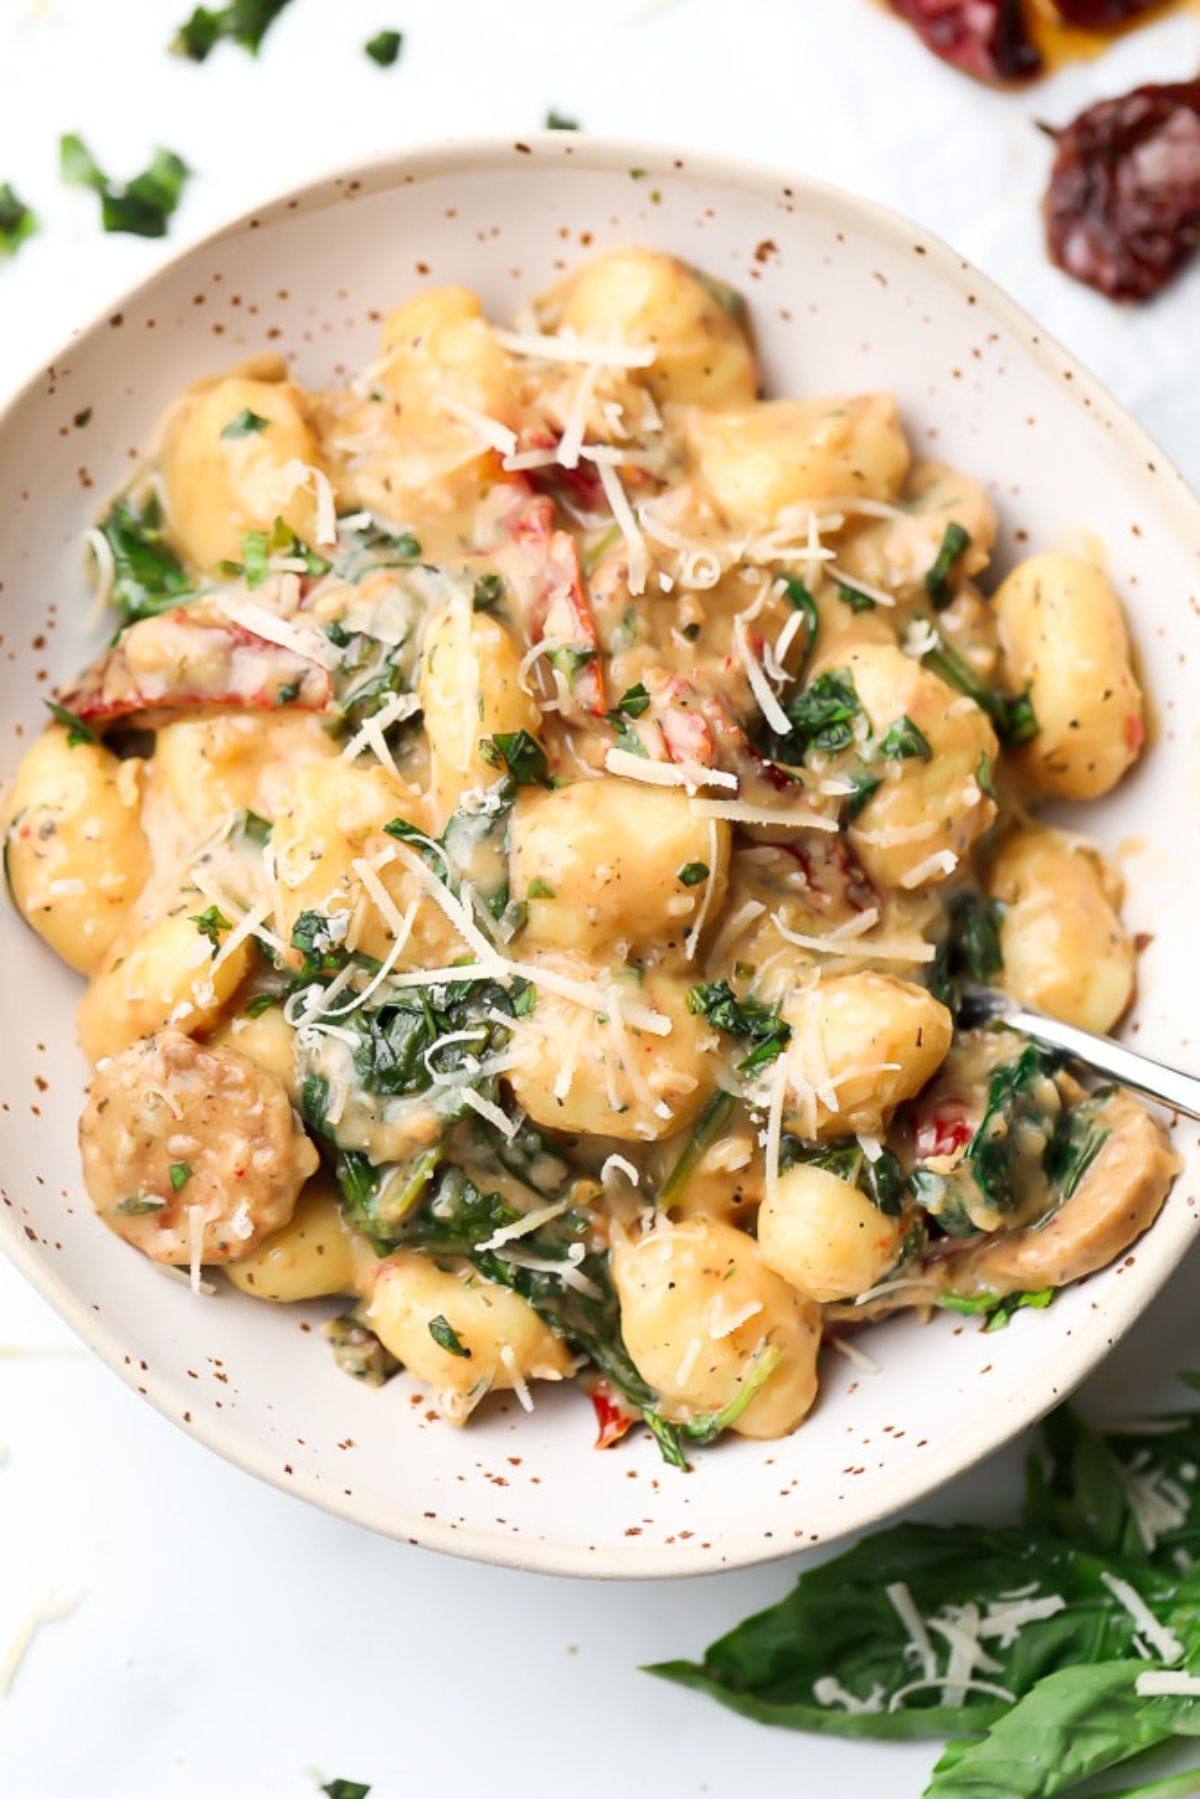 A bowl of tuscan vegan gnocchi topped with grated vegan cheese and herbs